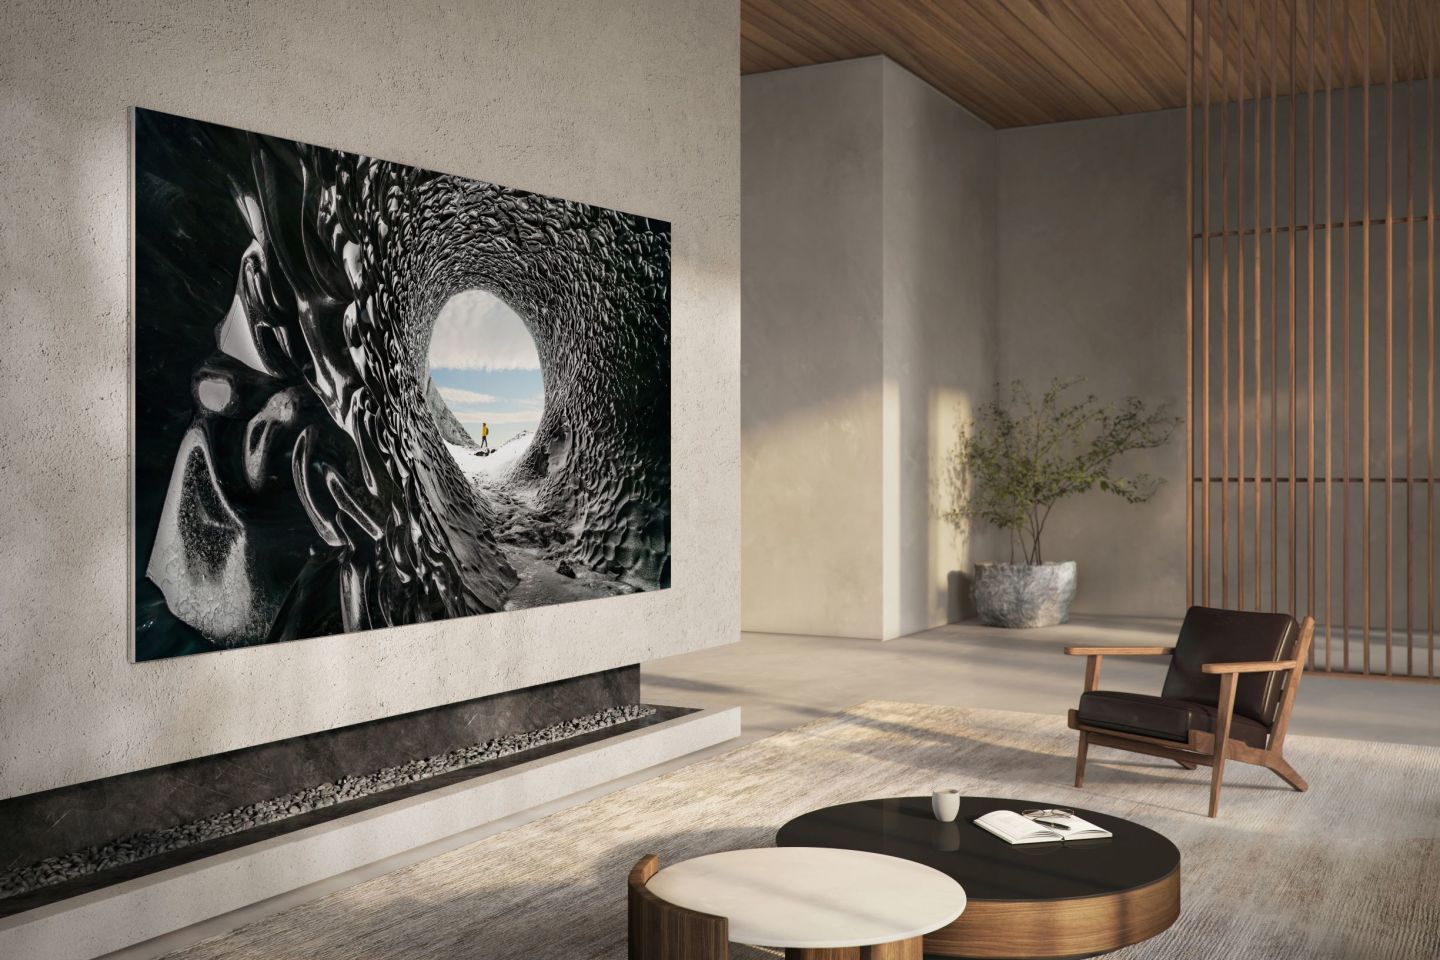 Samsung has unveiled a non-modular home version of its MicroLED TV